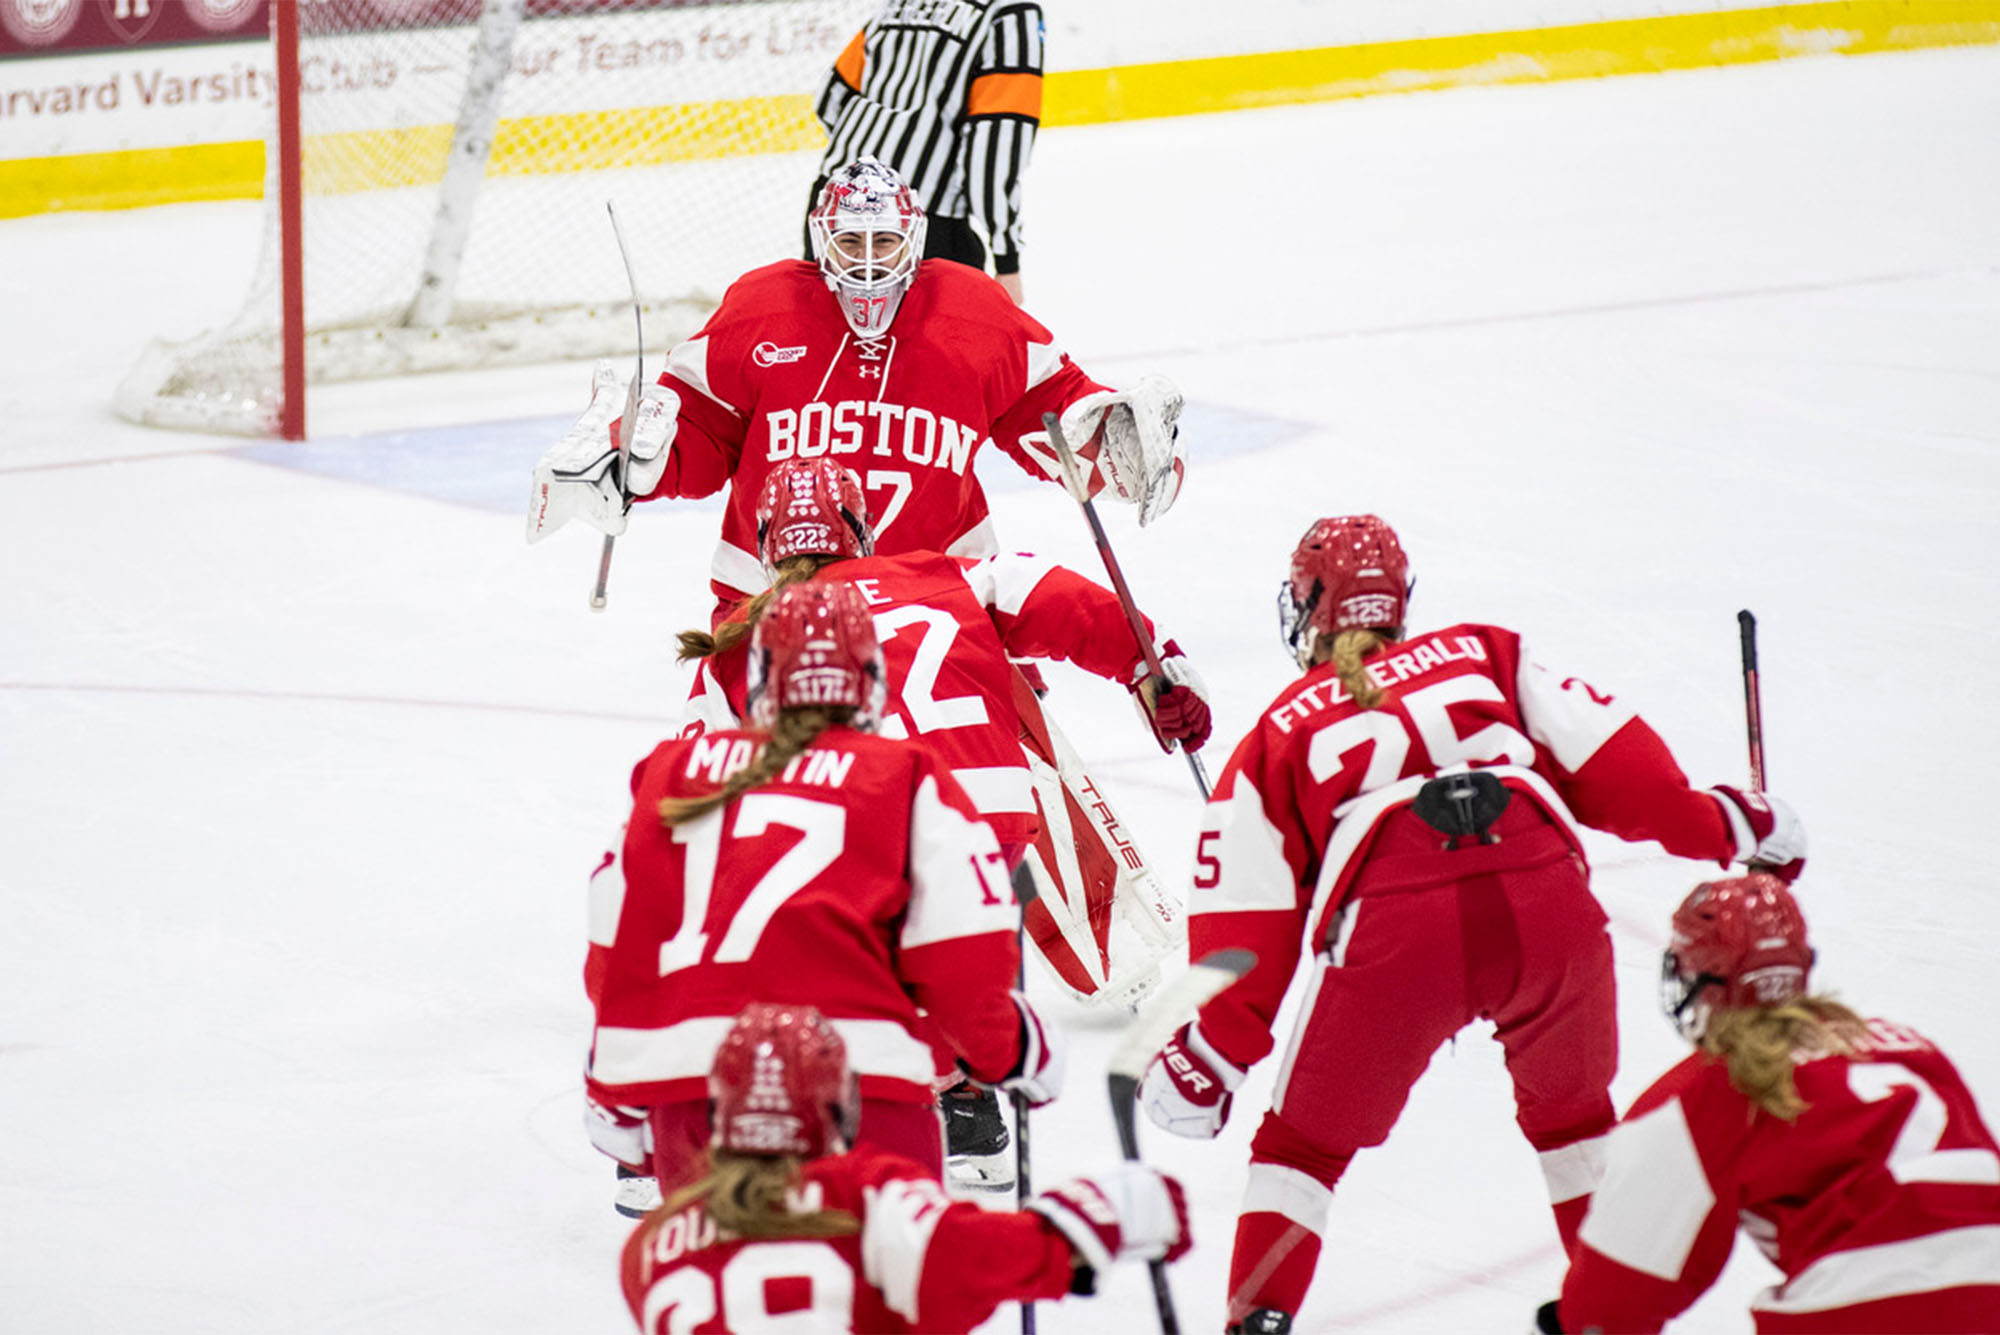 Photo: A group of women's hockey players in red and white jerseys celebrate after the shootout during the beanpot semifinals